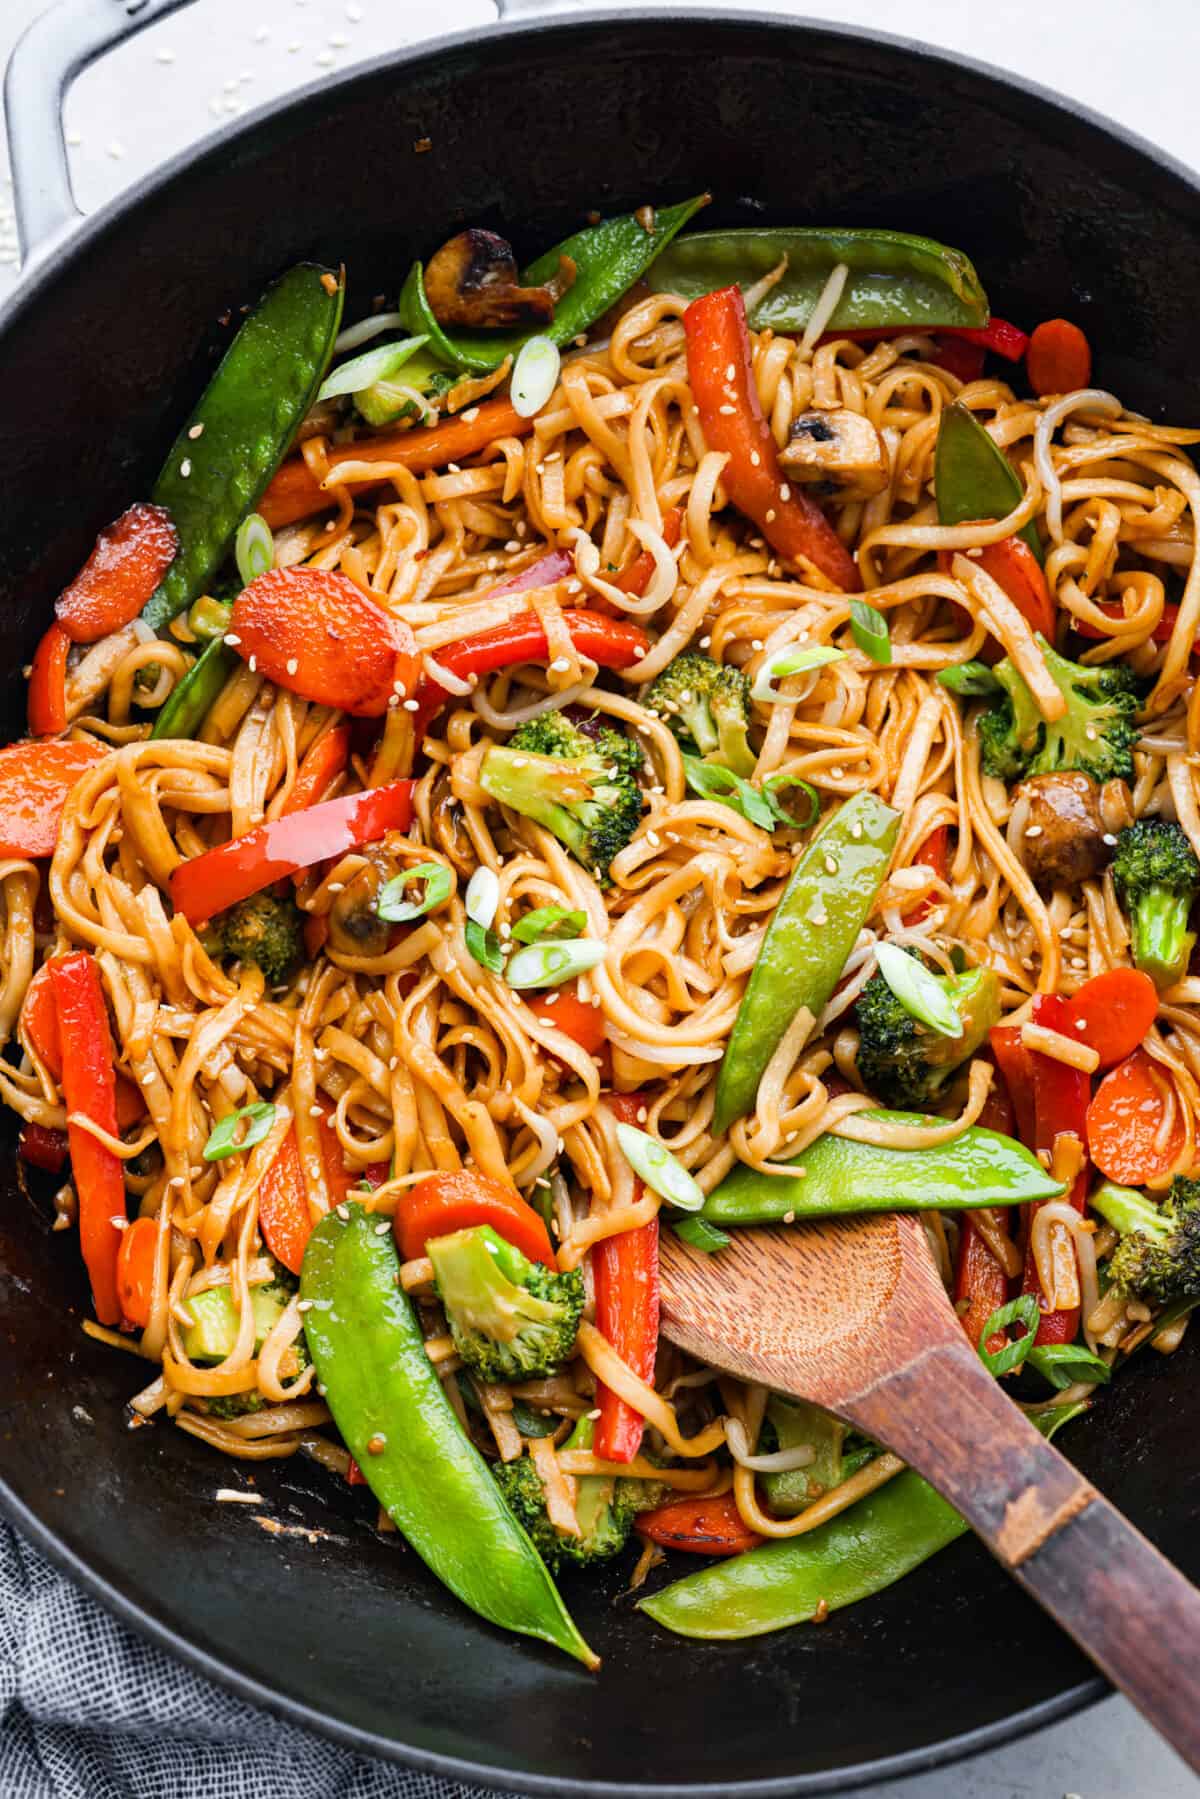 Vegetable Lo Mein Recipe (Ready in 20 Minutes!) | The Recipe Critic